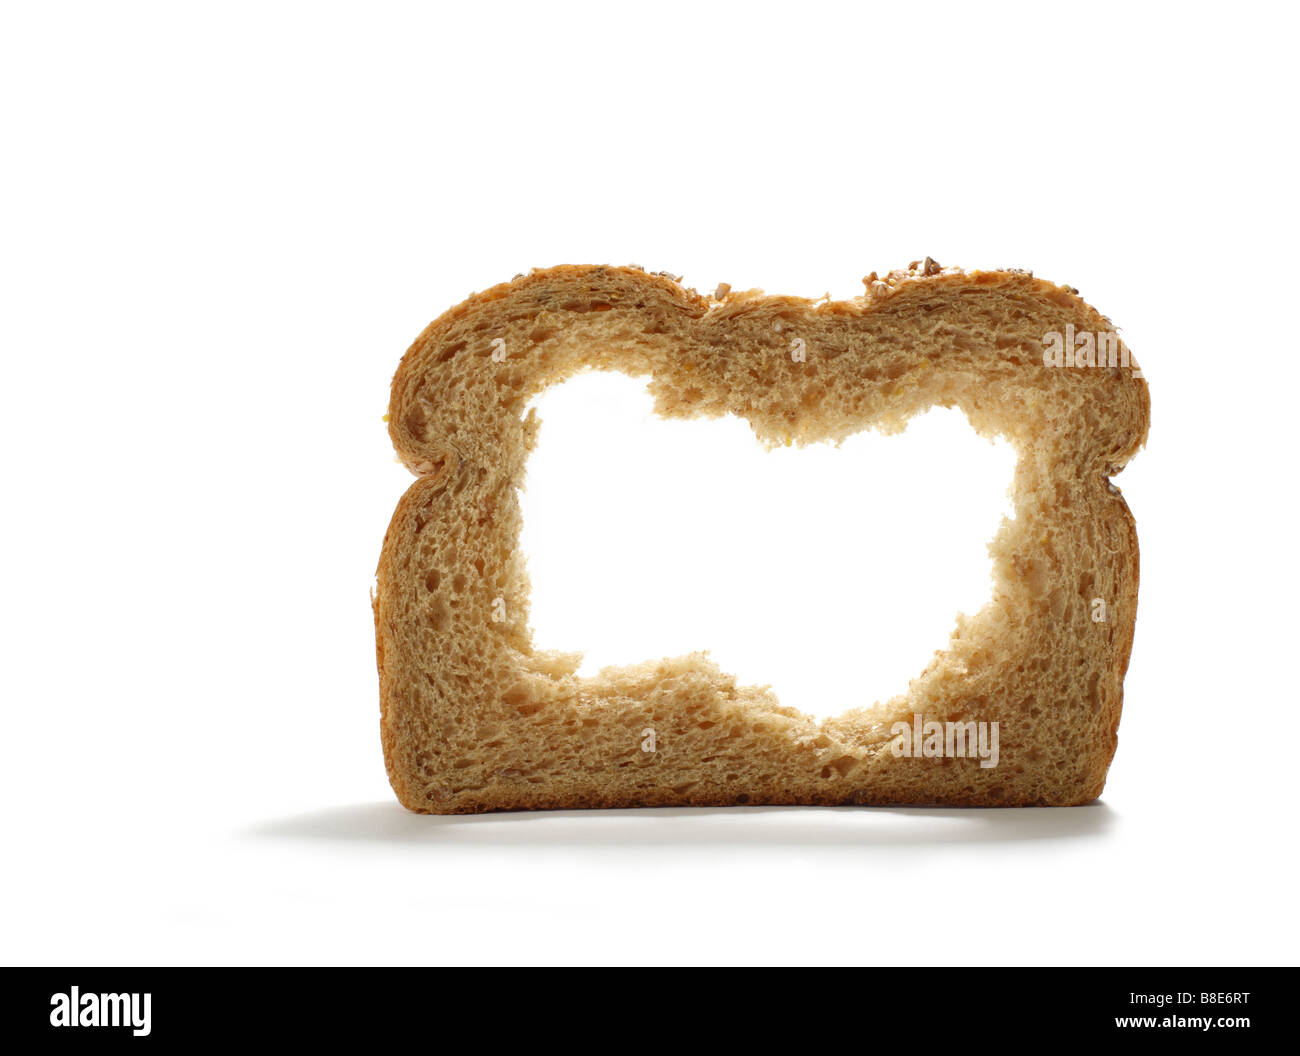 Piece of Sliced Bread with Center Missing Stock Photo